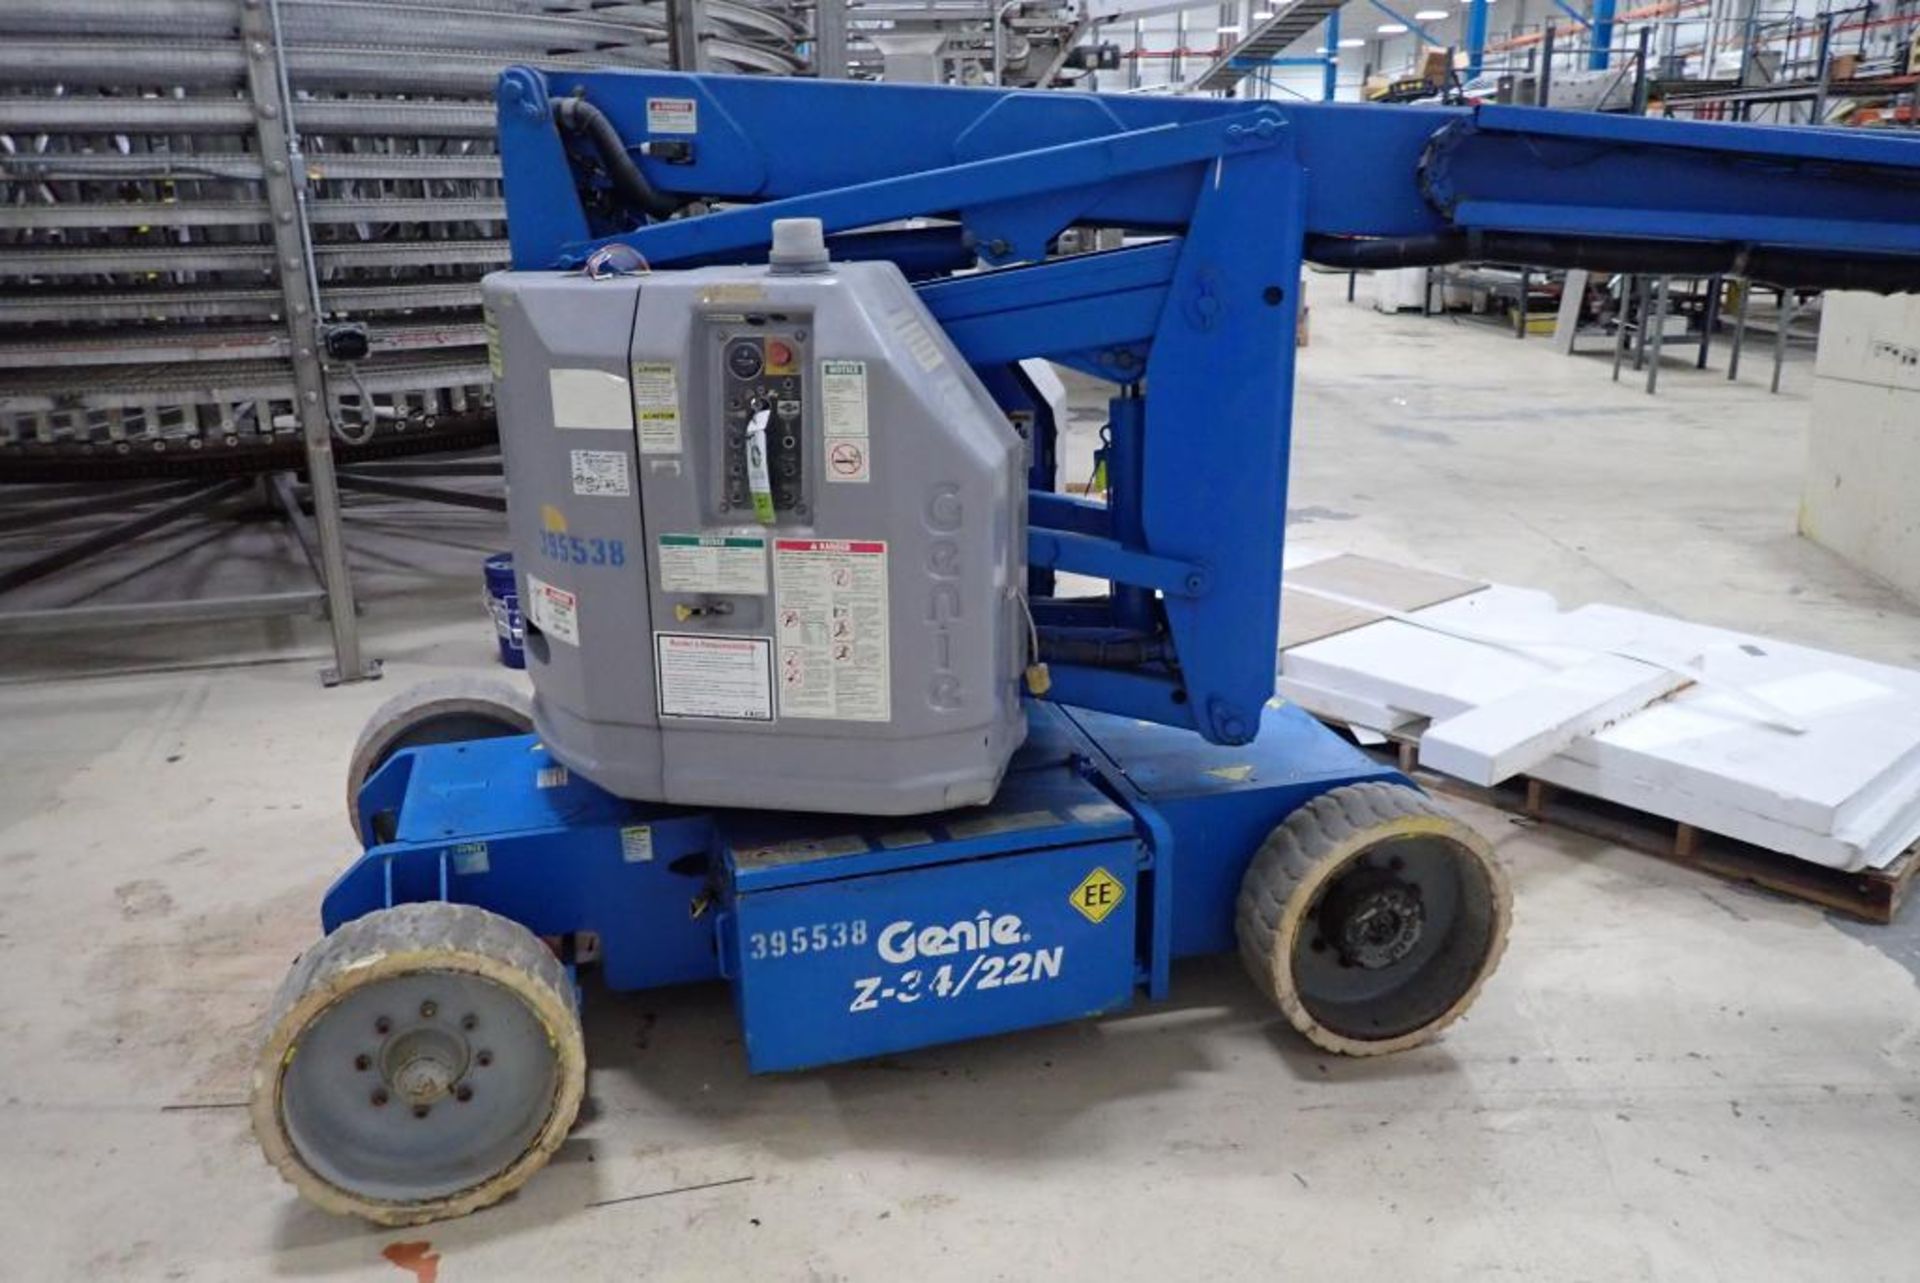 2002 Genie electric boom lift - Image 3 of 20